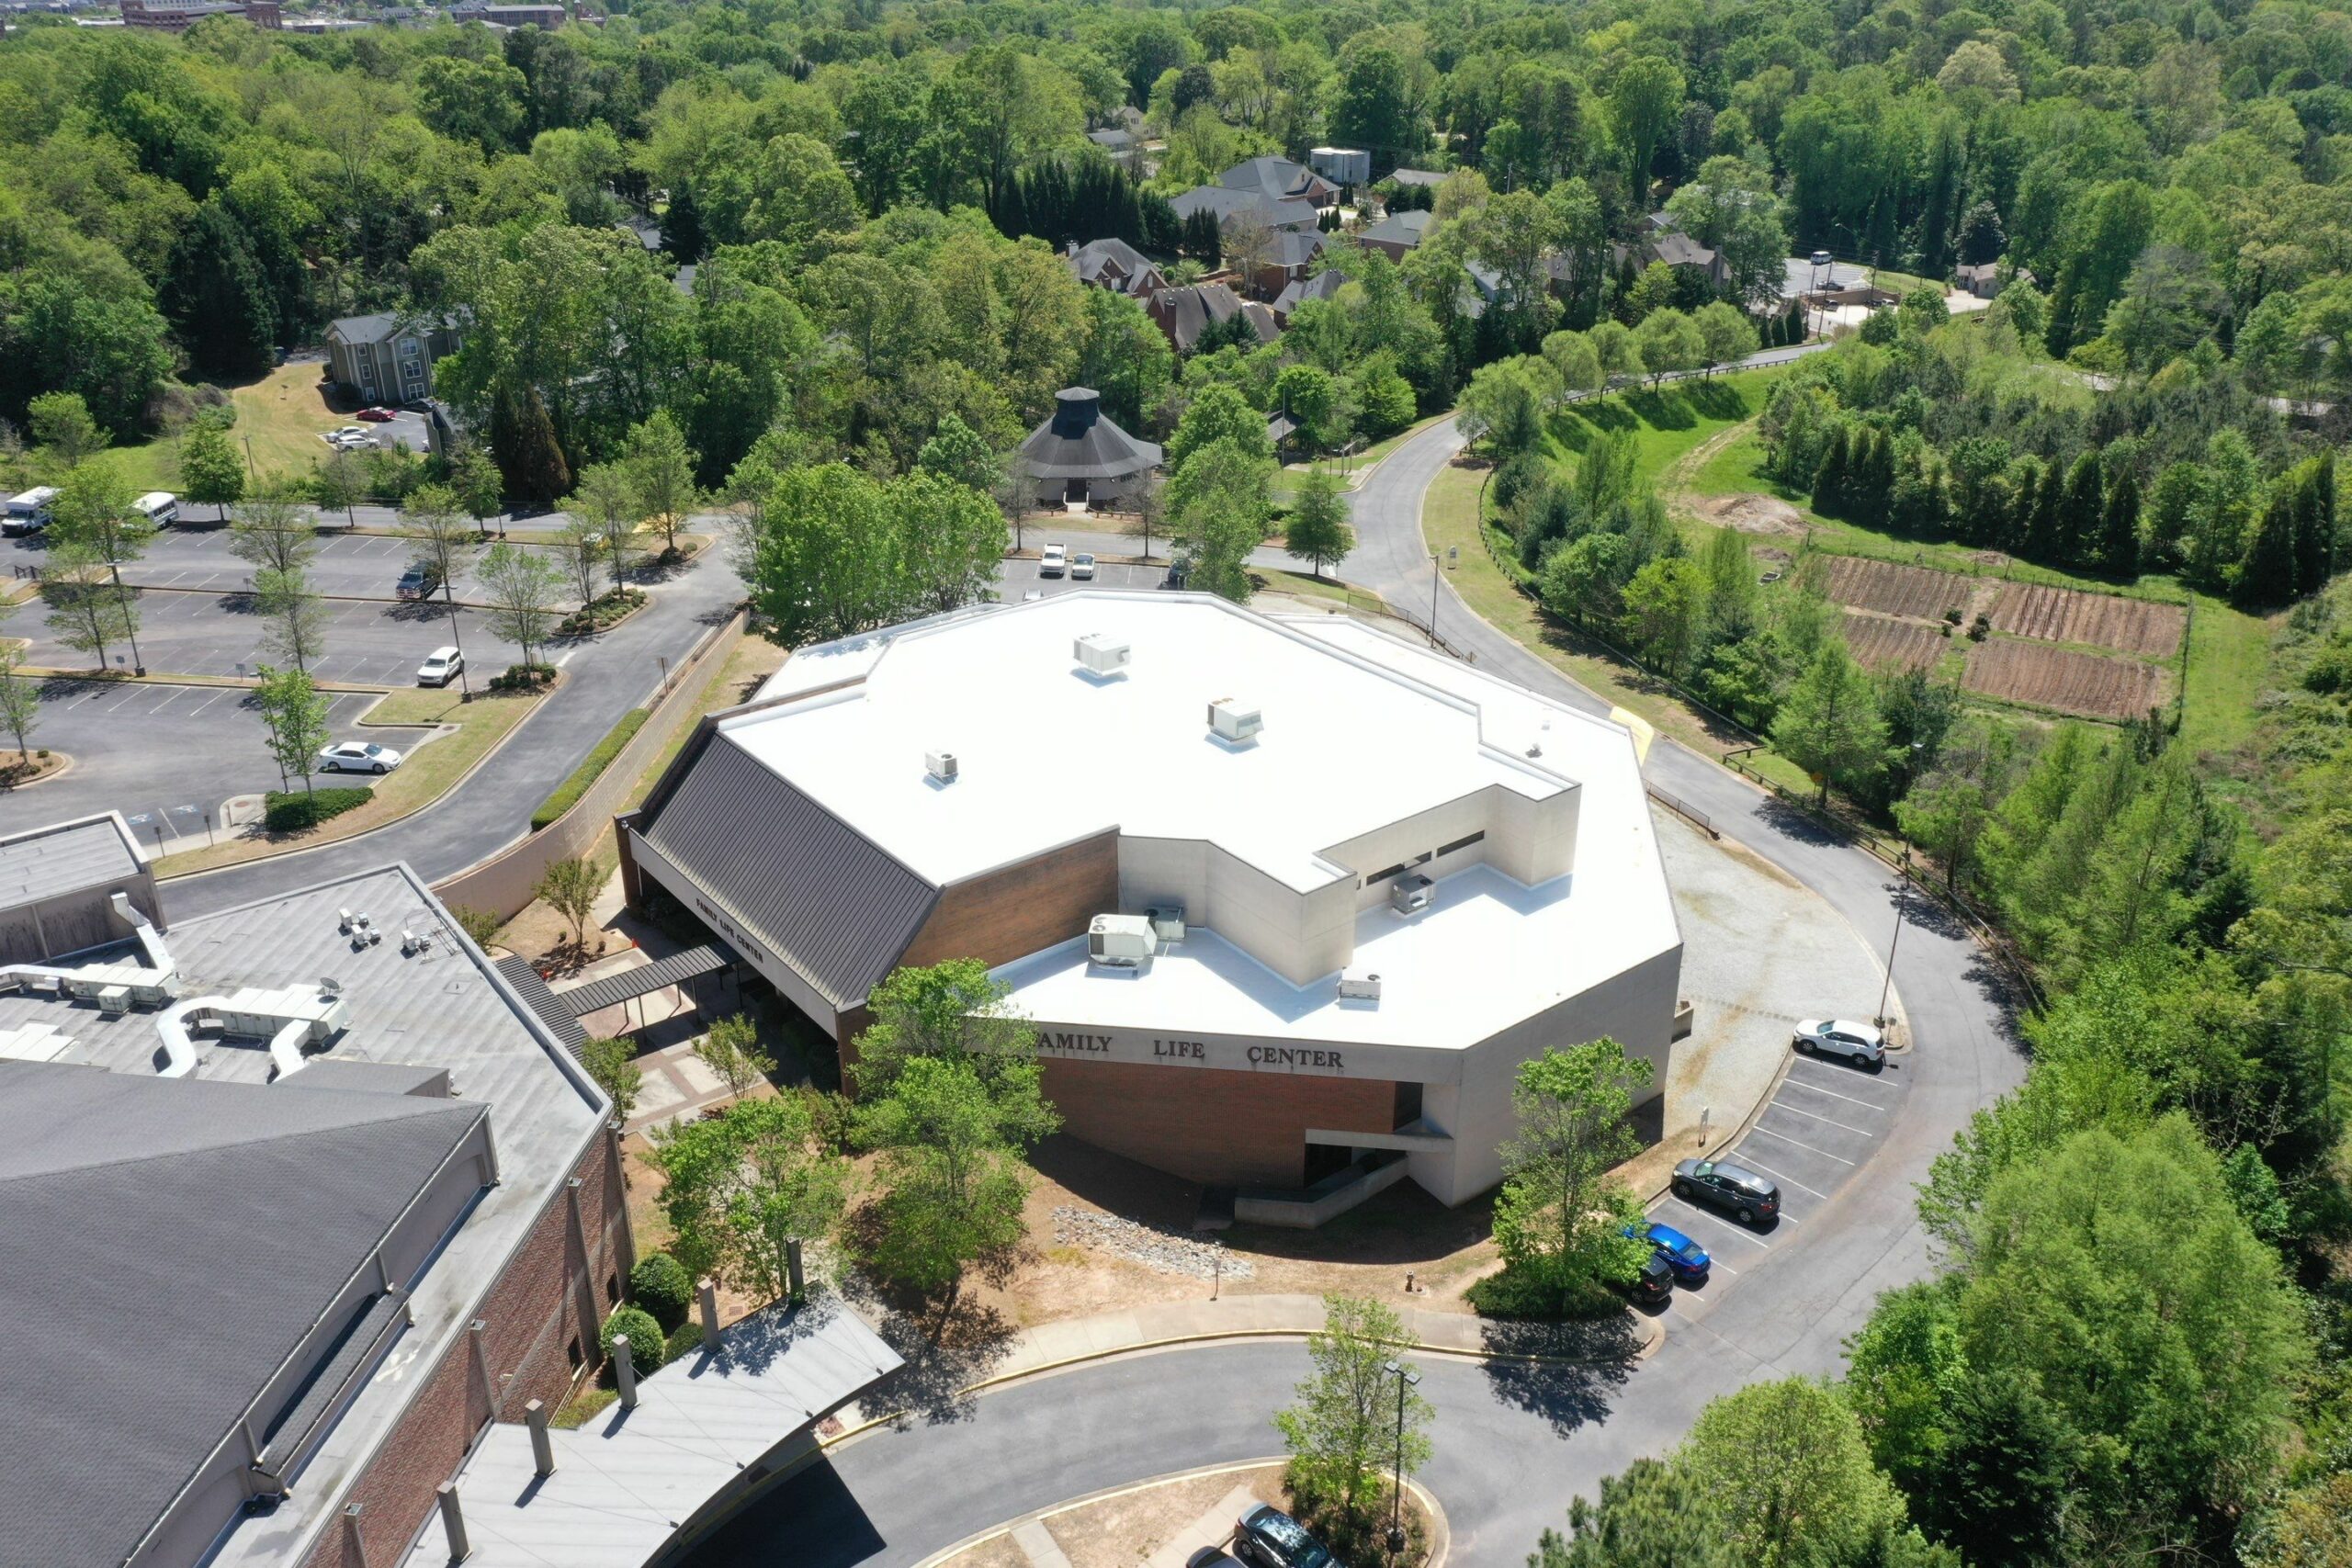 Family Life Center – Commercial Roof Coating